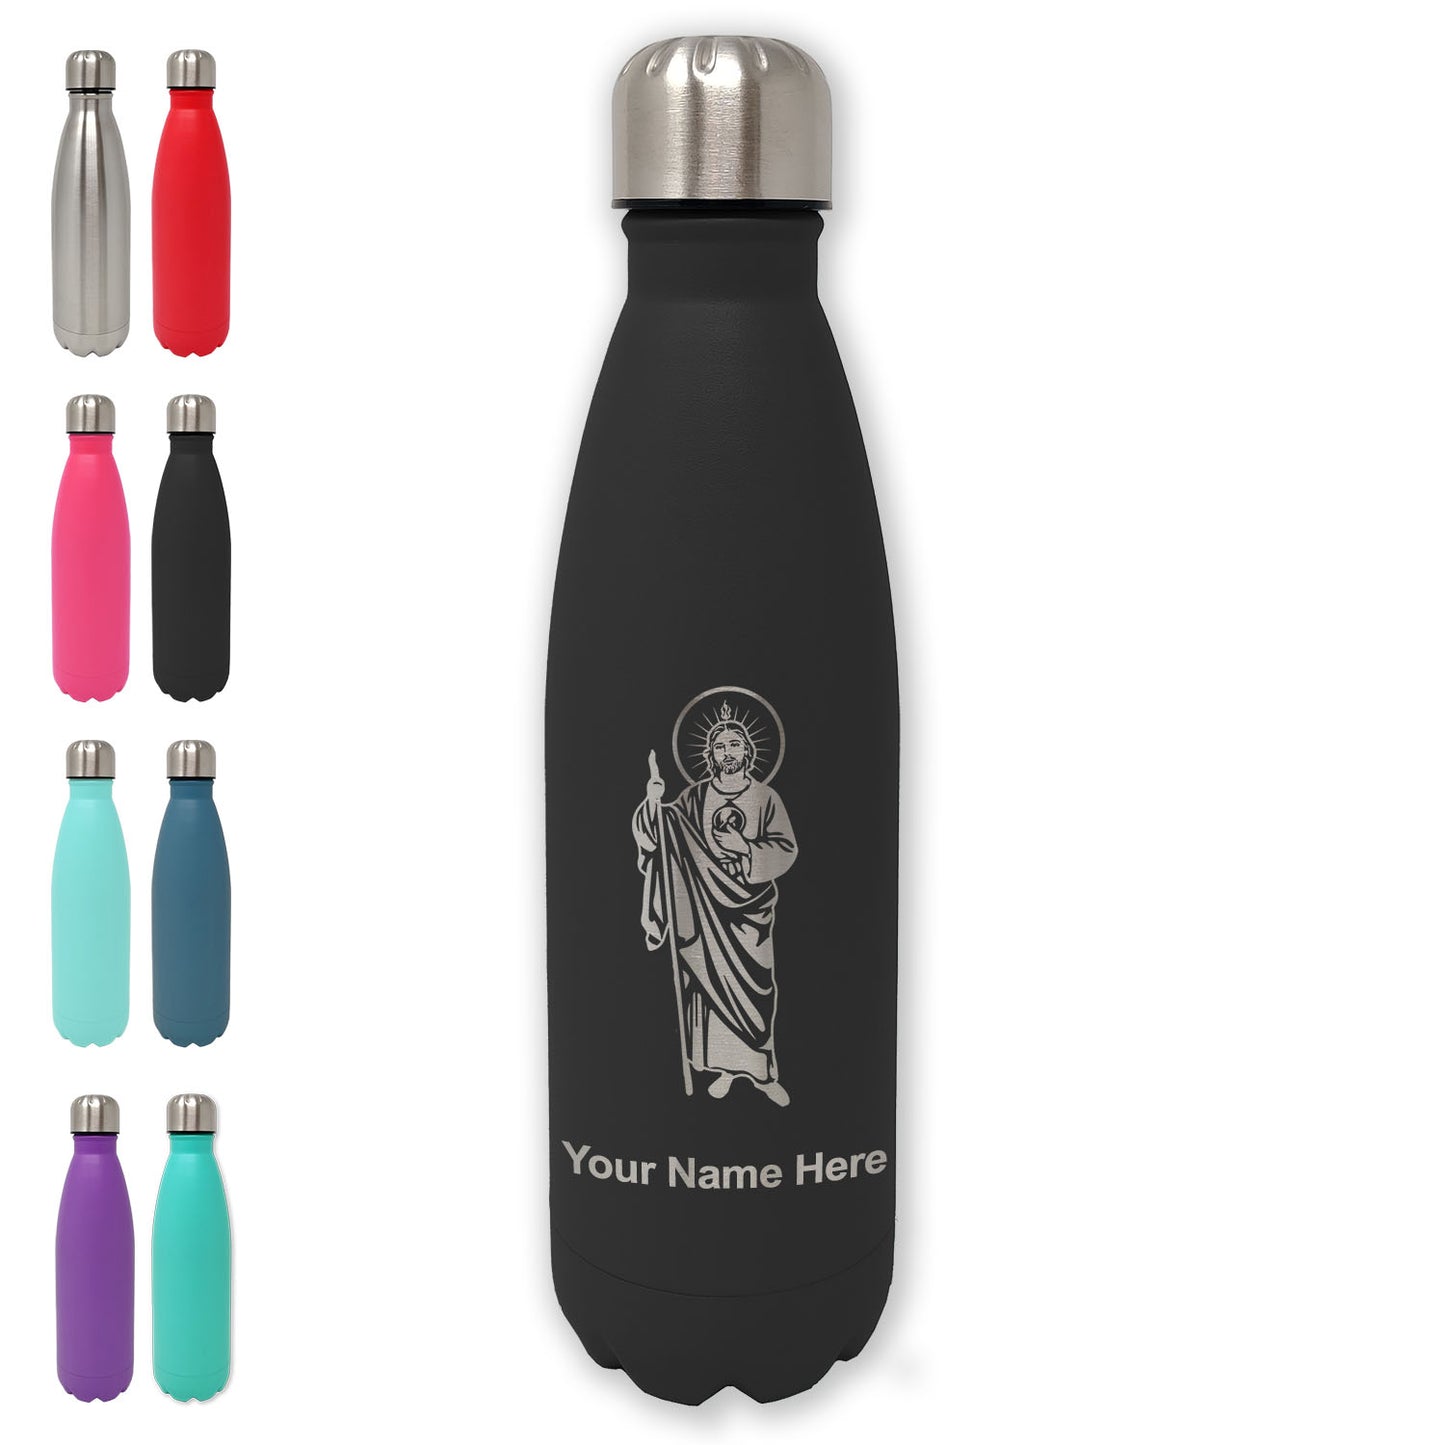 LaserGram Double Wall Water Bottle, Saint Jude, Personalized Engraving Included